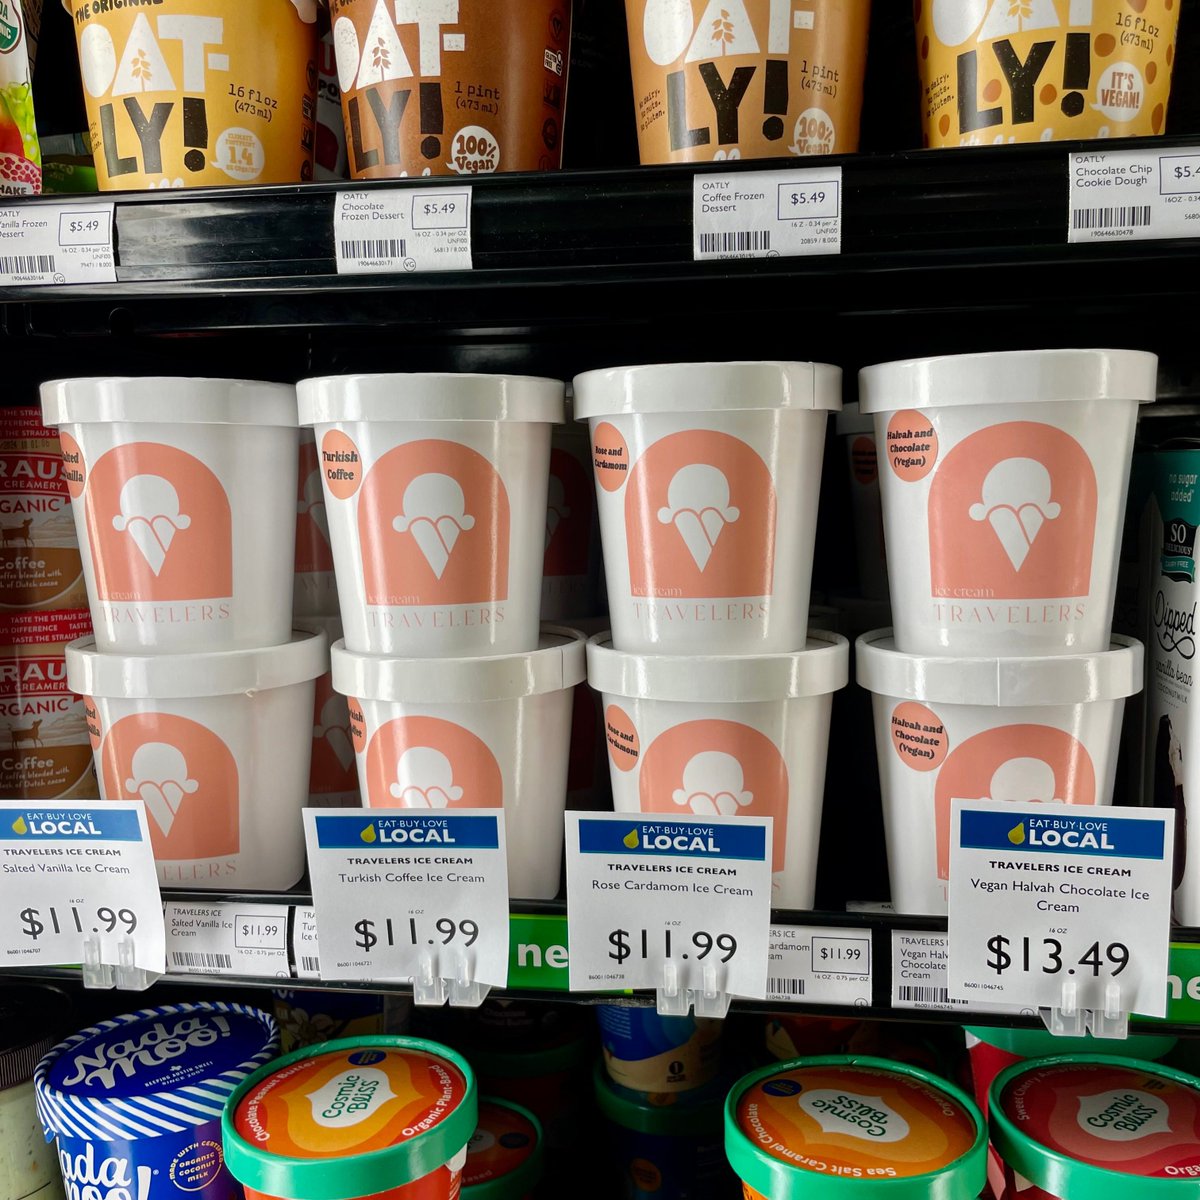 👀Look who's here! Find #TravelersIceCream pints in the freezer🍦
Travelers Ice Cream is made from scratch in small batches right here in Southern Oregon. Discover unique and interesting flavors like Turkish Coffee, Rose & Cardamom, and vegan Halvah & Chocolate! #eatbuylovelocal